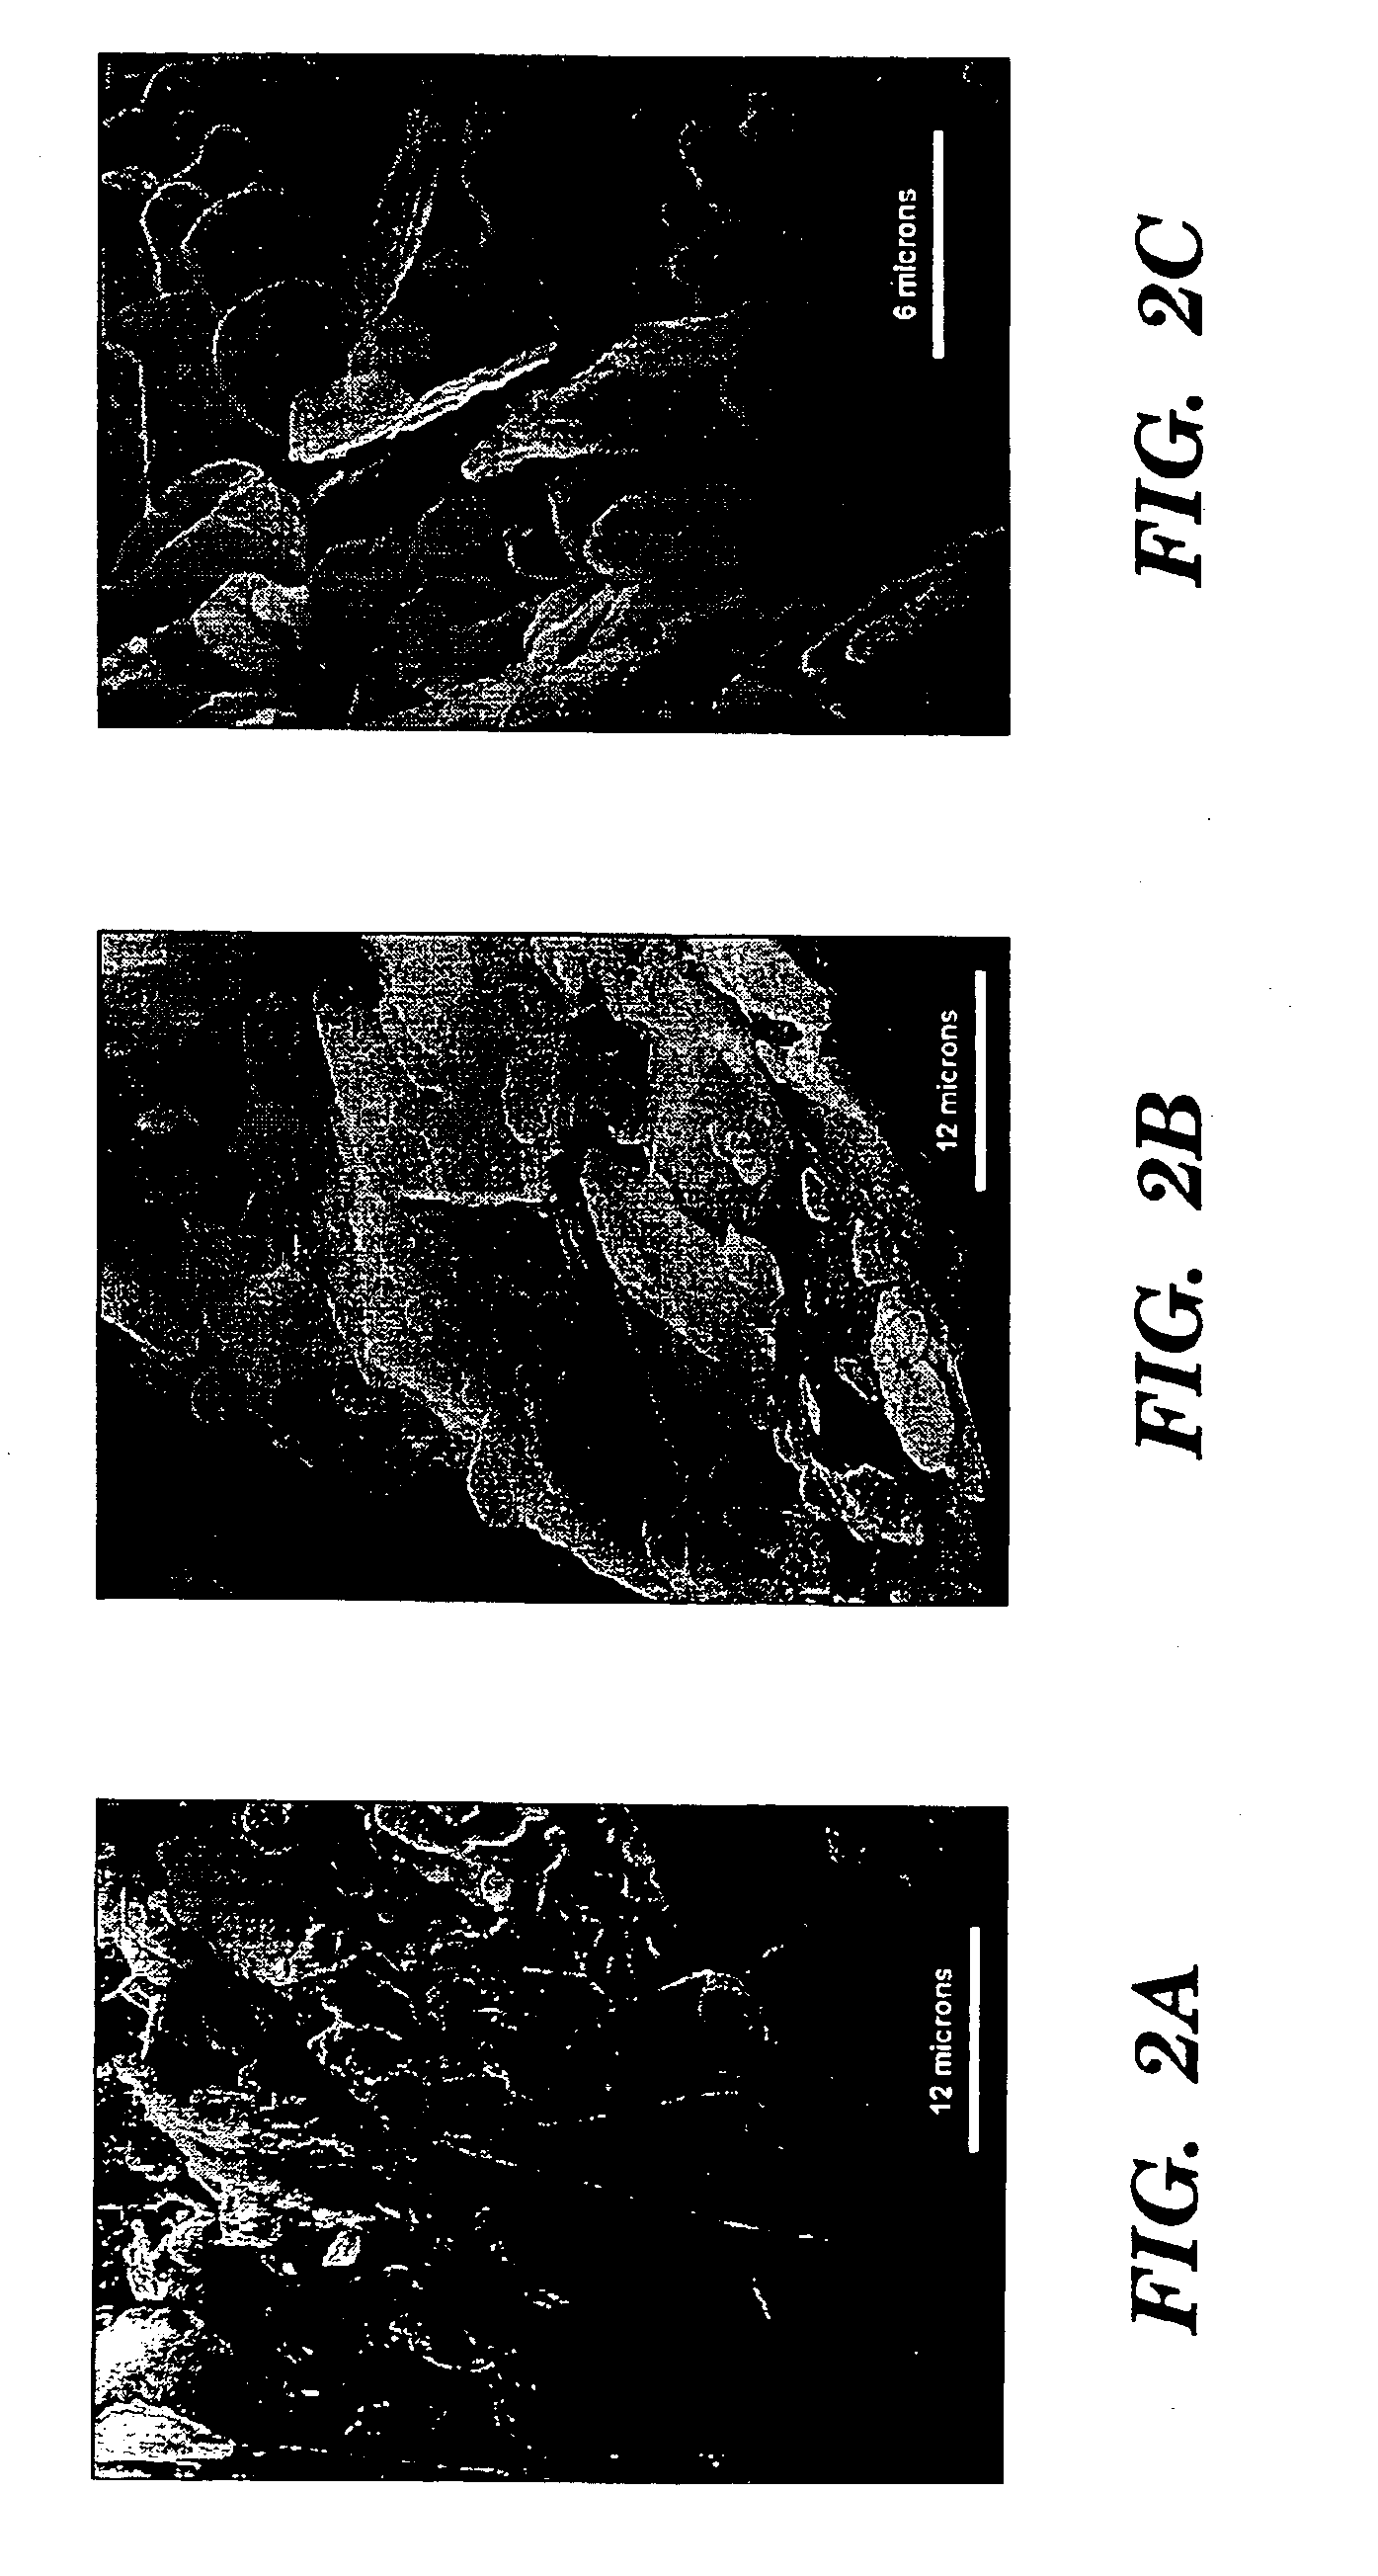 Highly delaminated hexagonal boron nitride powders, process for making, and uses thereof